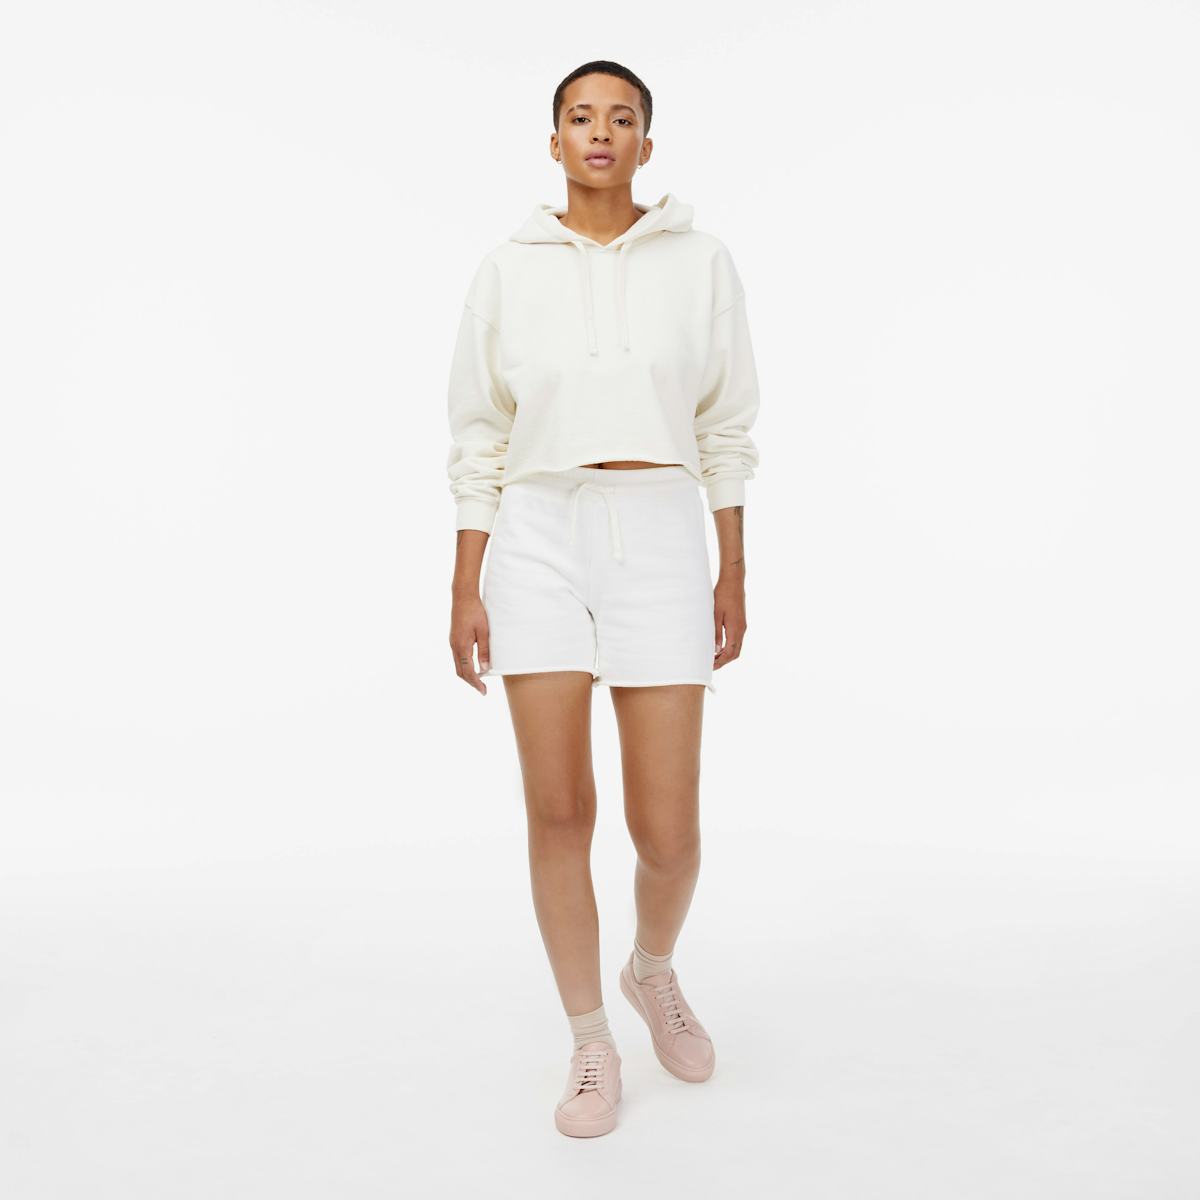 RecycledTerryShorts_OffWhite_Womens_OnFigure_1x1_0894.jpg